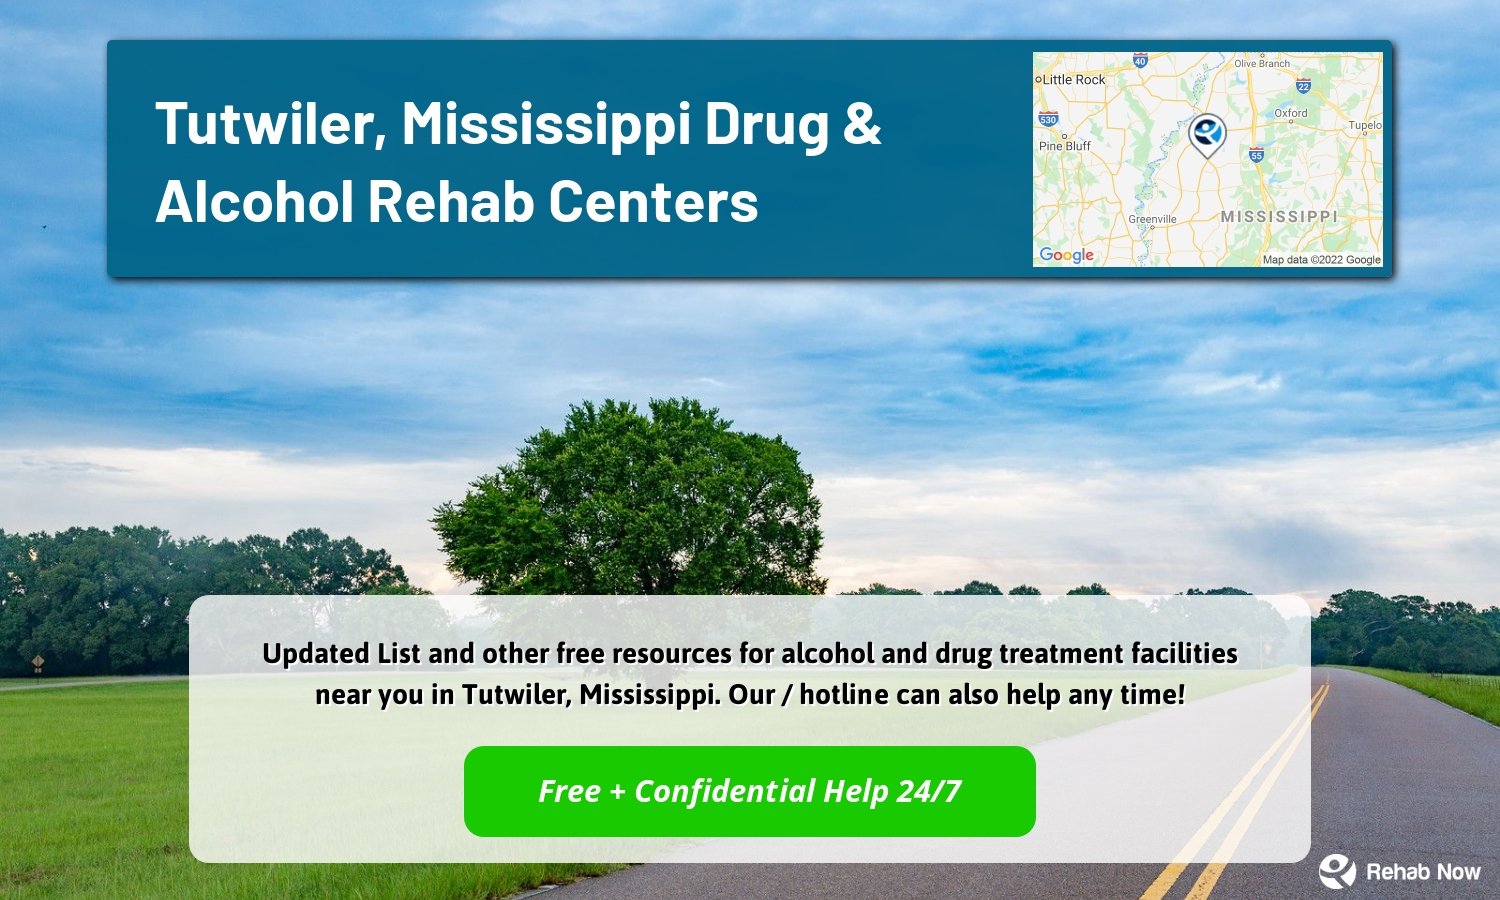  Updated List and other free resources for alcohol and drug treatment facilities near you in Tutwiler, Mississippi. Our / hotline can also help any time!